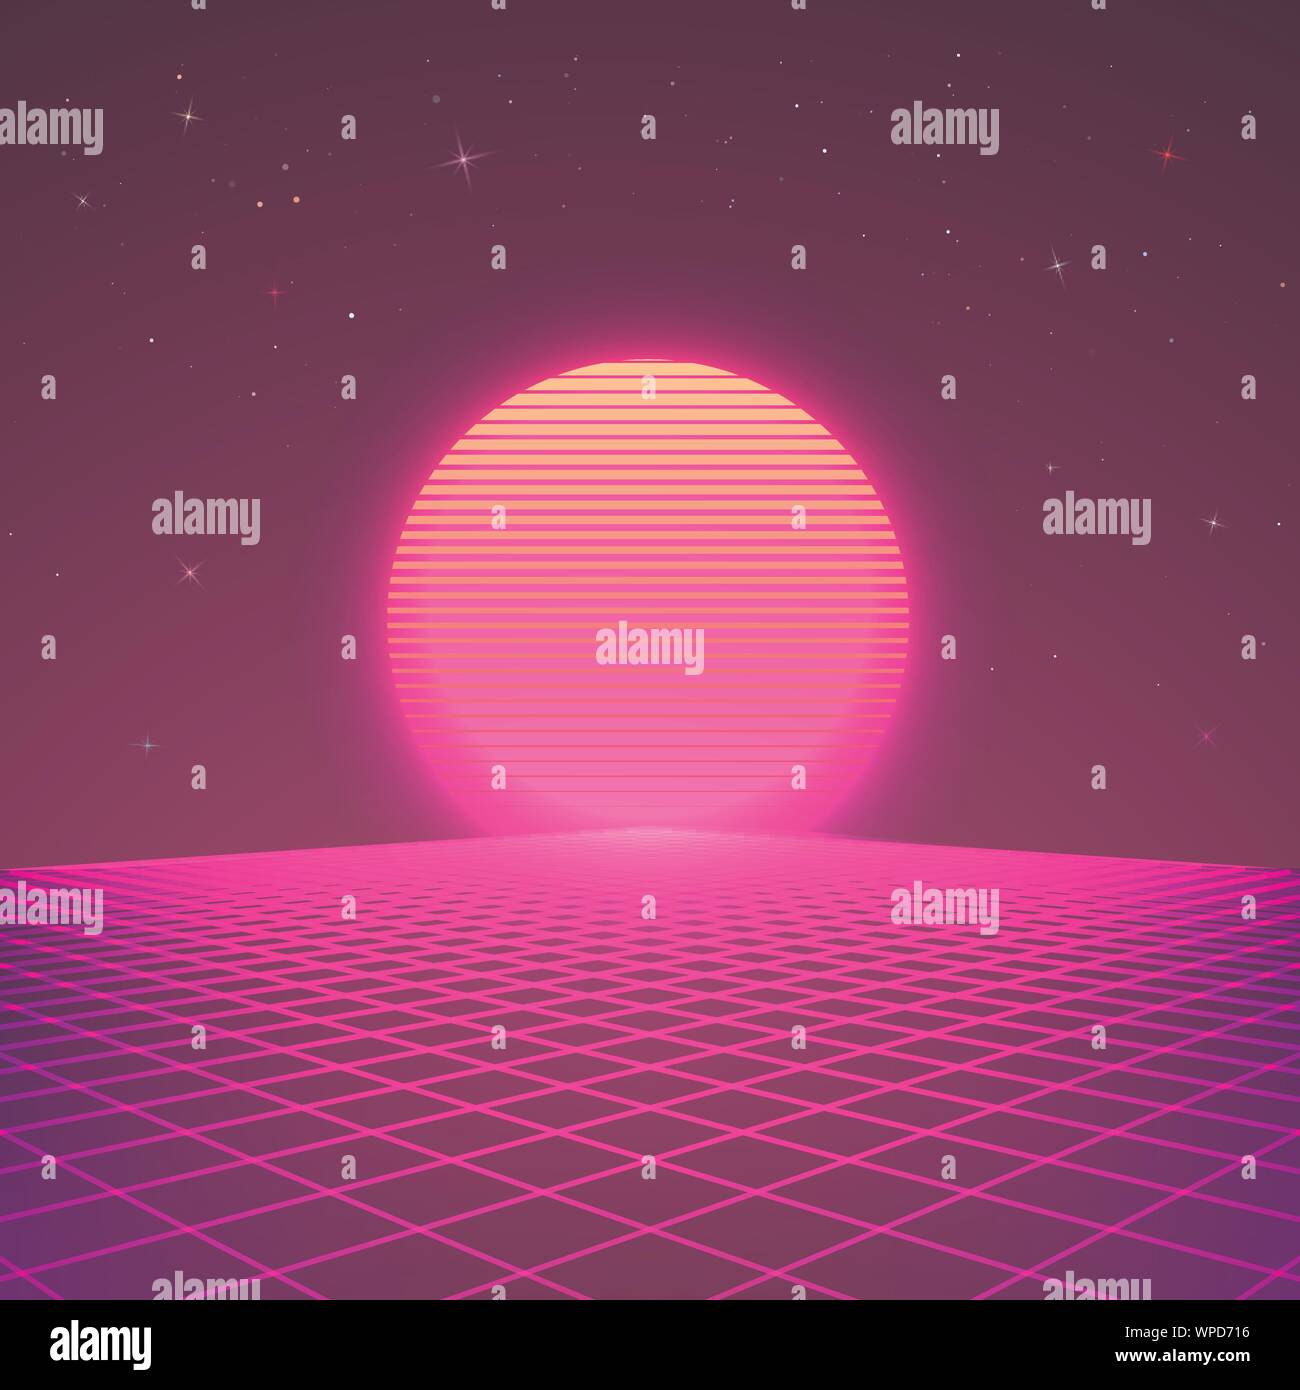 80s style background. Sci-fi or retro music poster wallpaper. Flyer for retro party 80s Vector illustration Stock Vector